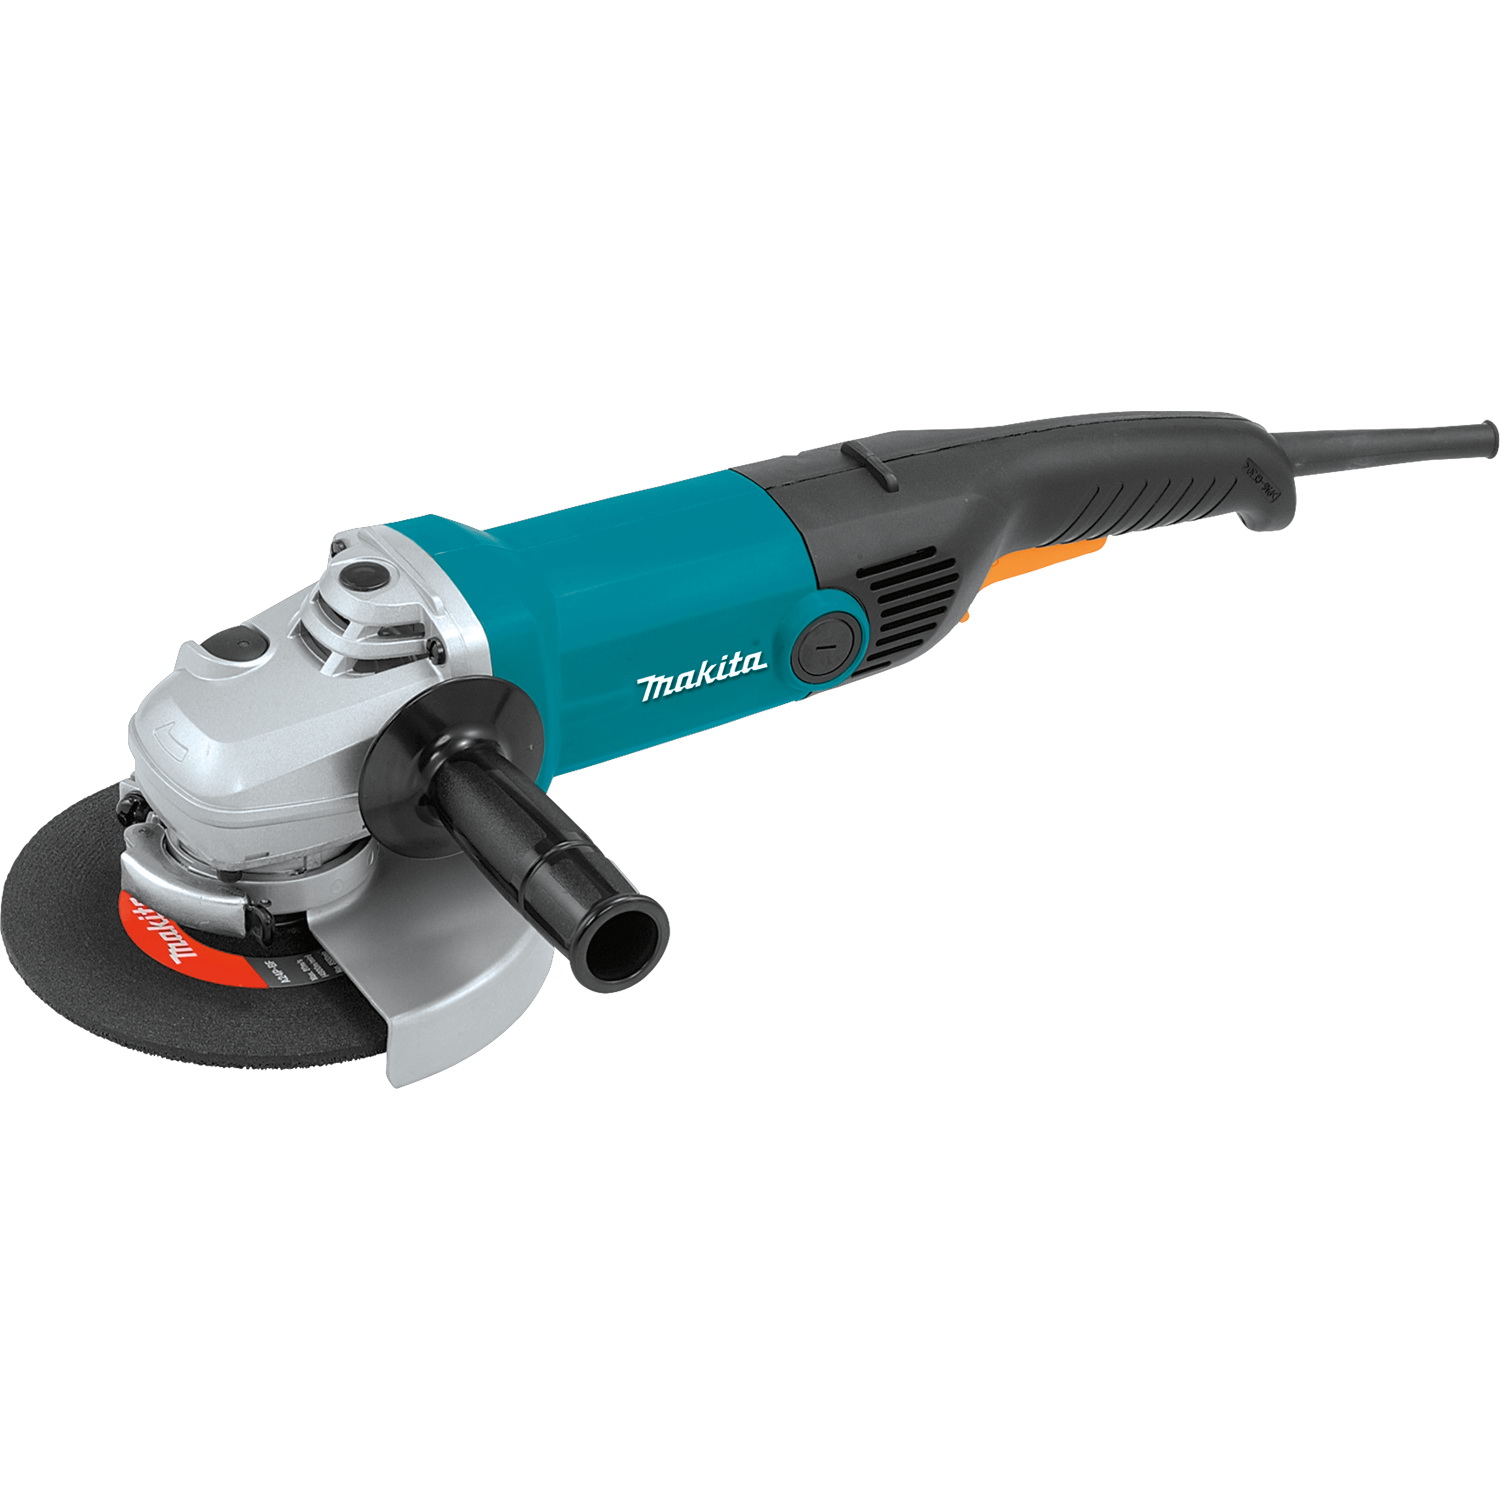 Makita GA7011C Angle Grinder, 15 A, 5/8-11 Spindle, 7 in Dia Wheel, 6000 rpm Speed - 1